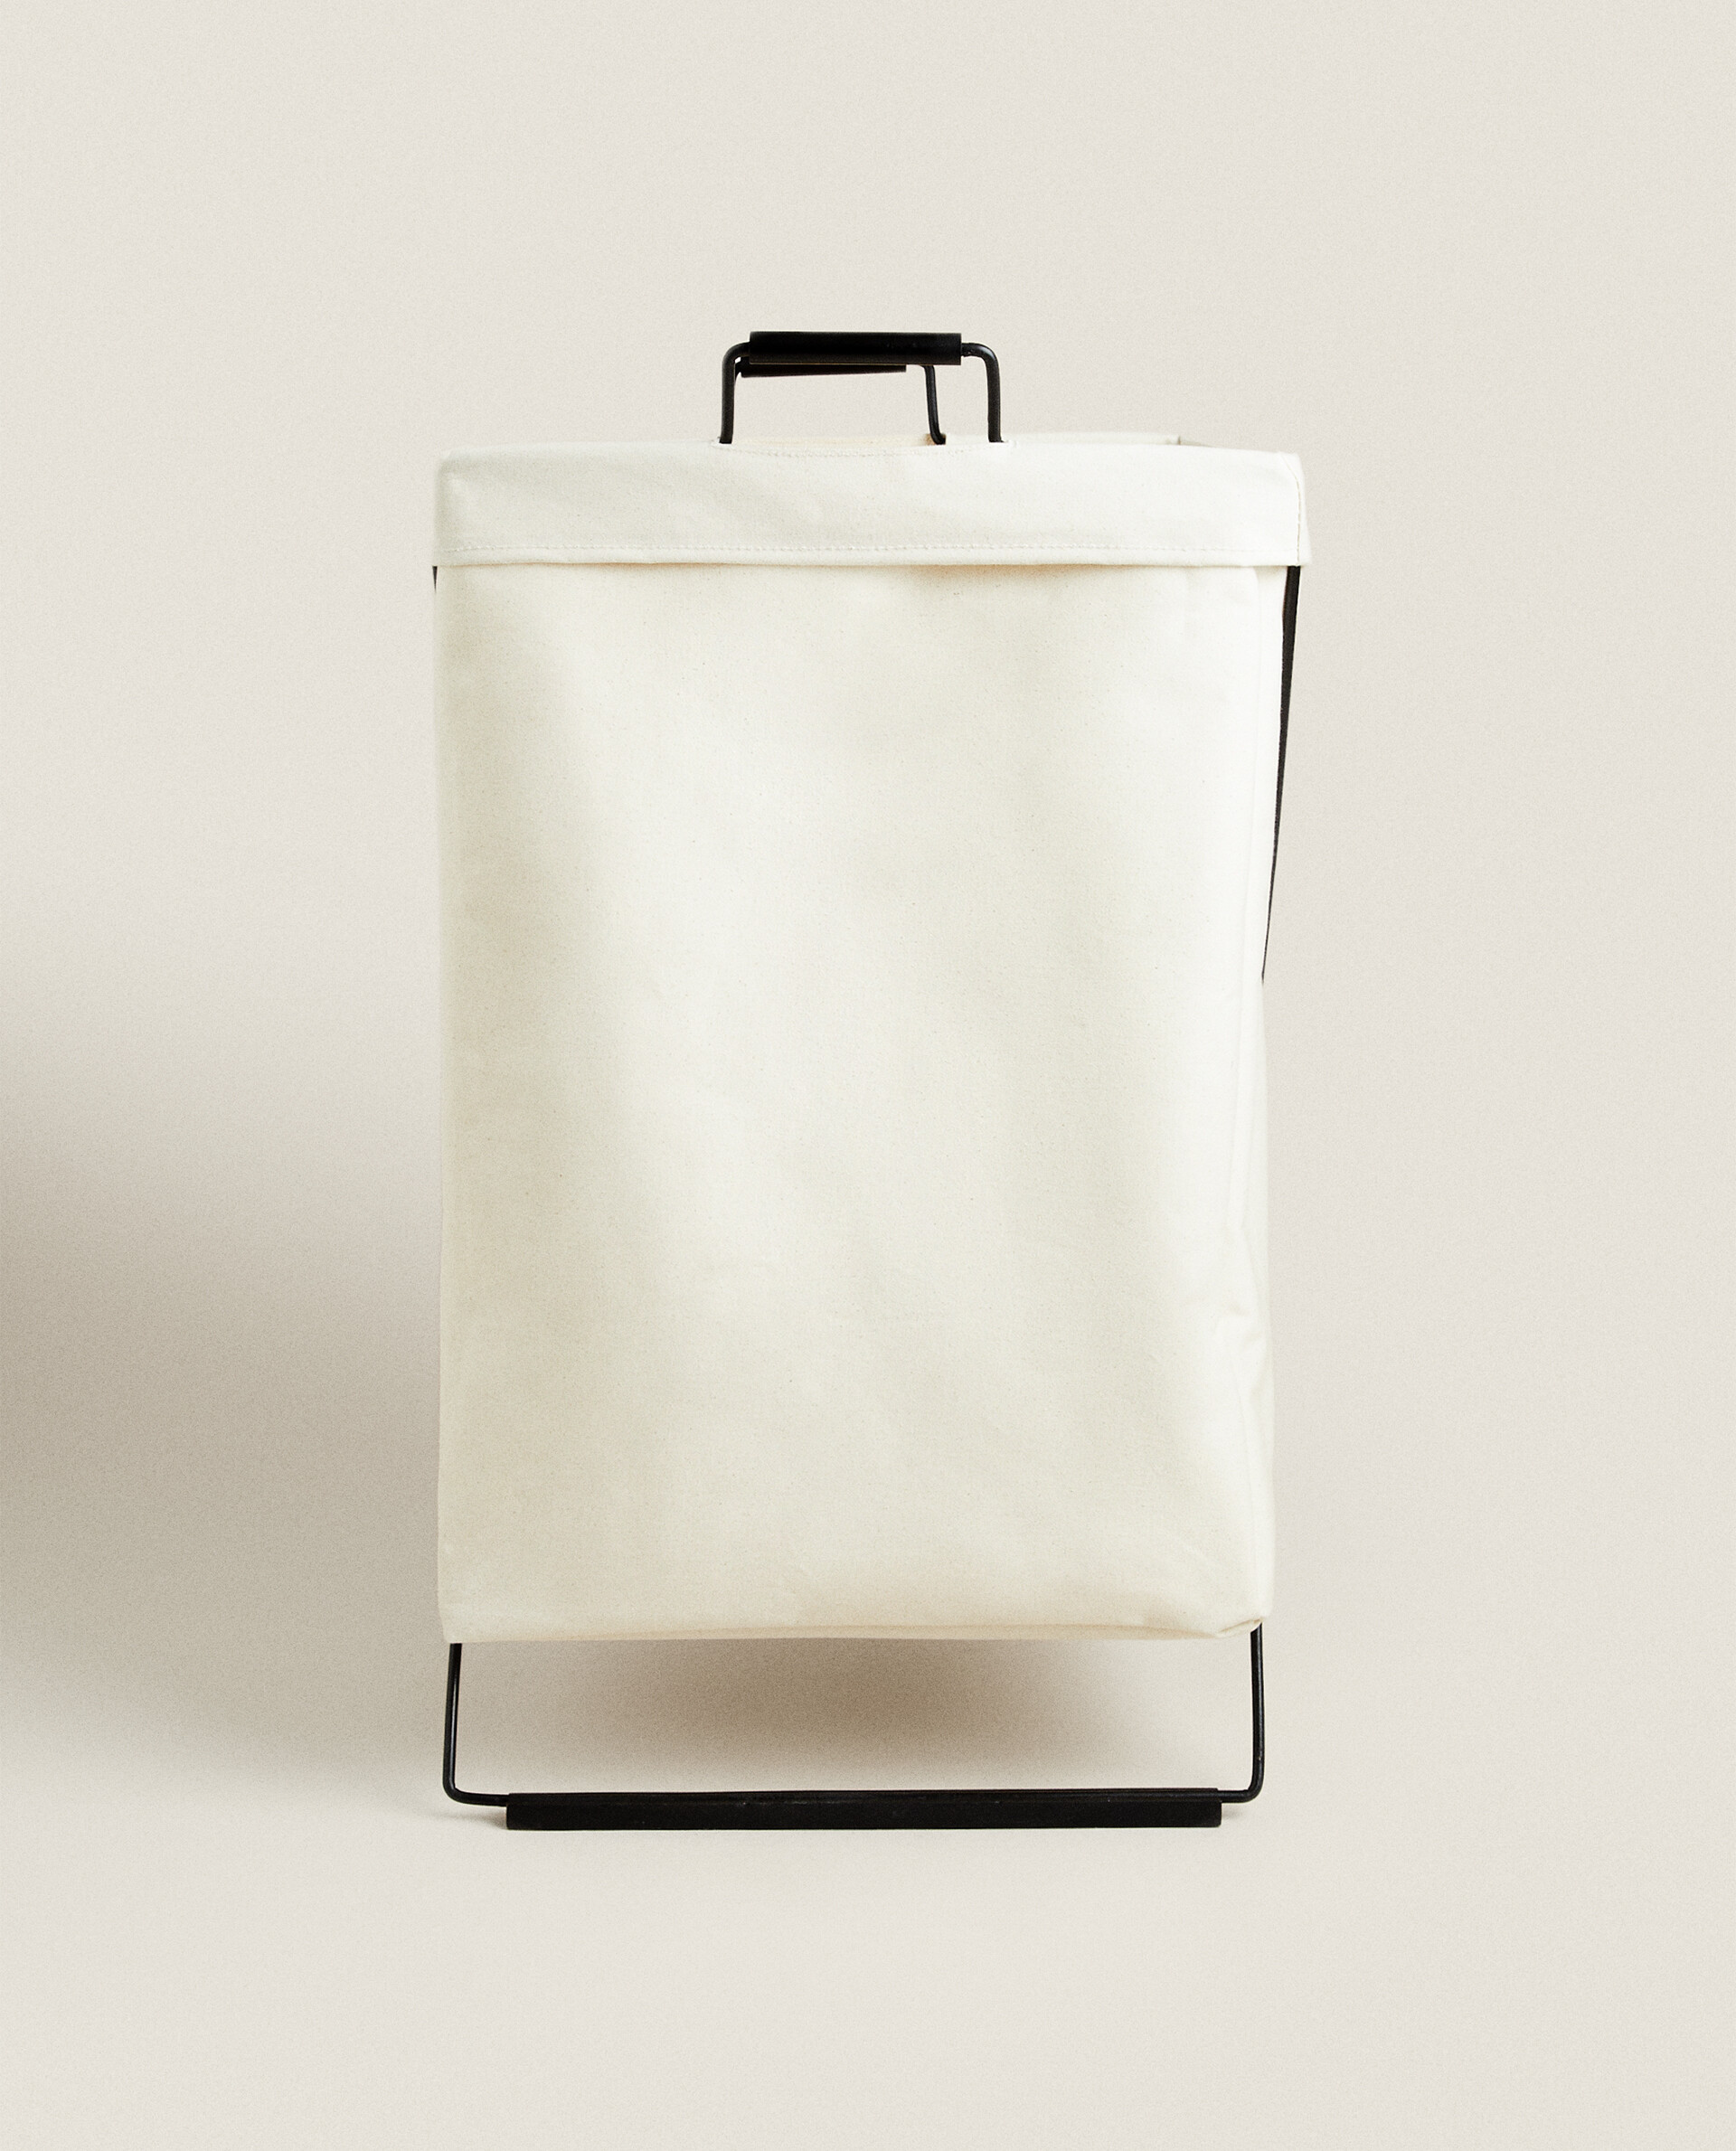 Ferm Living - Herman Laundry Stand